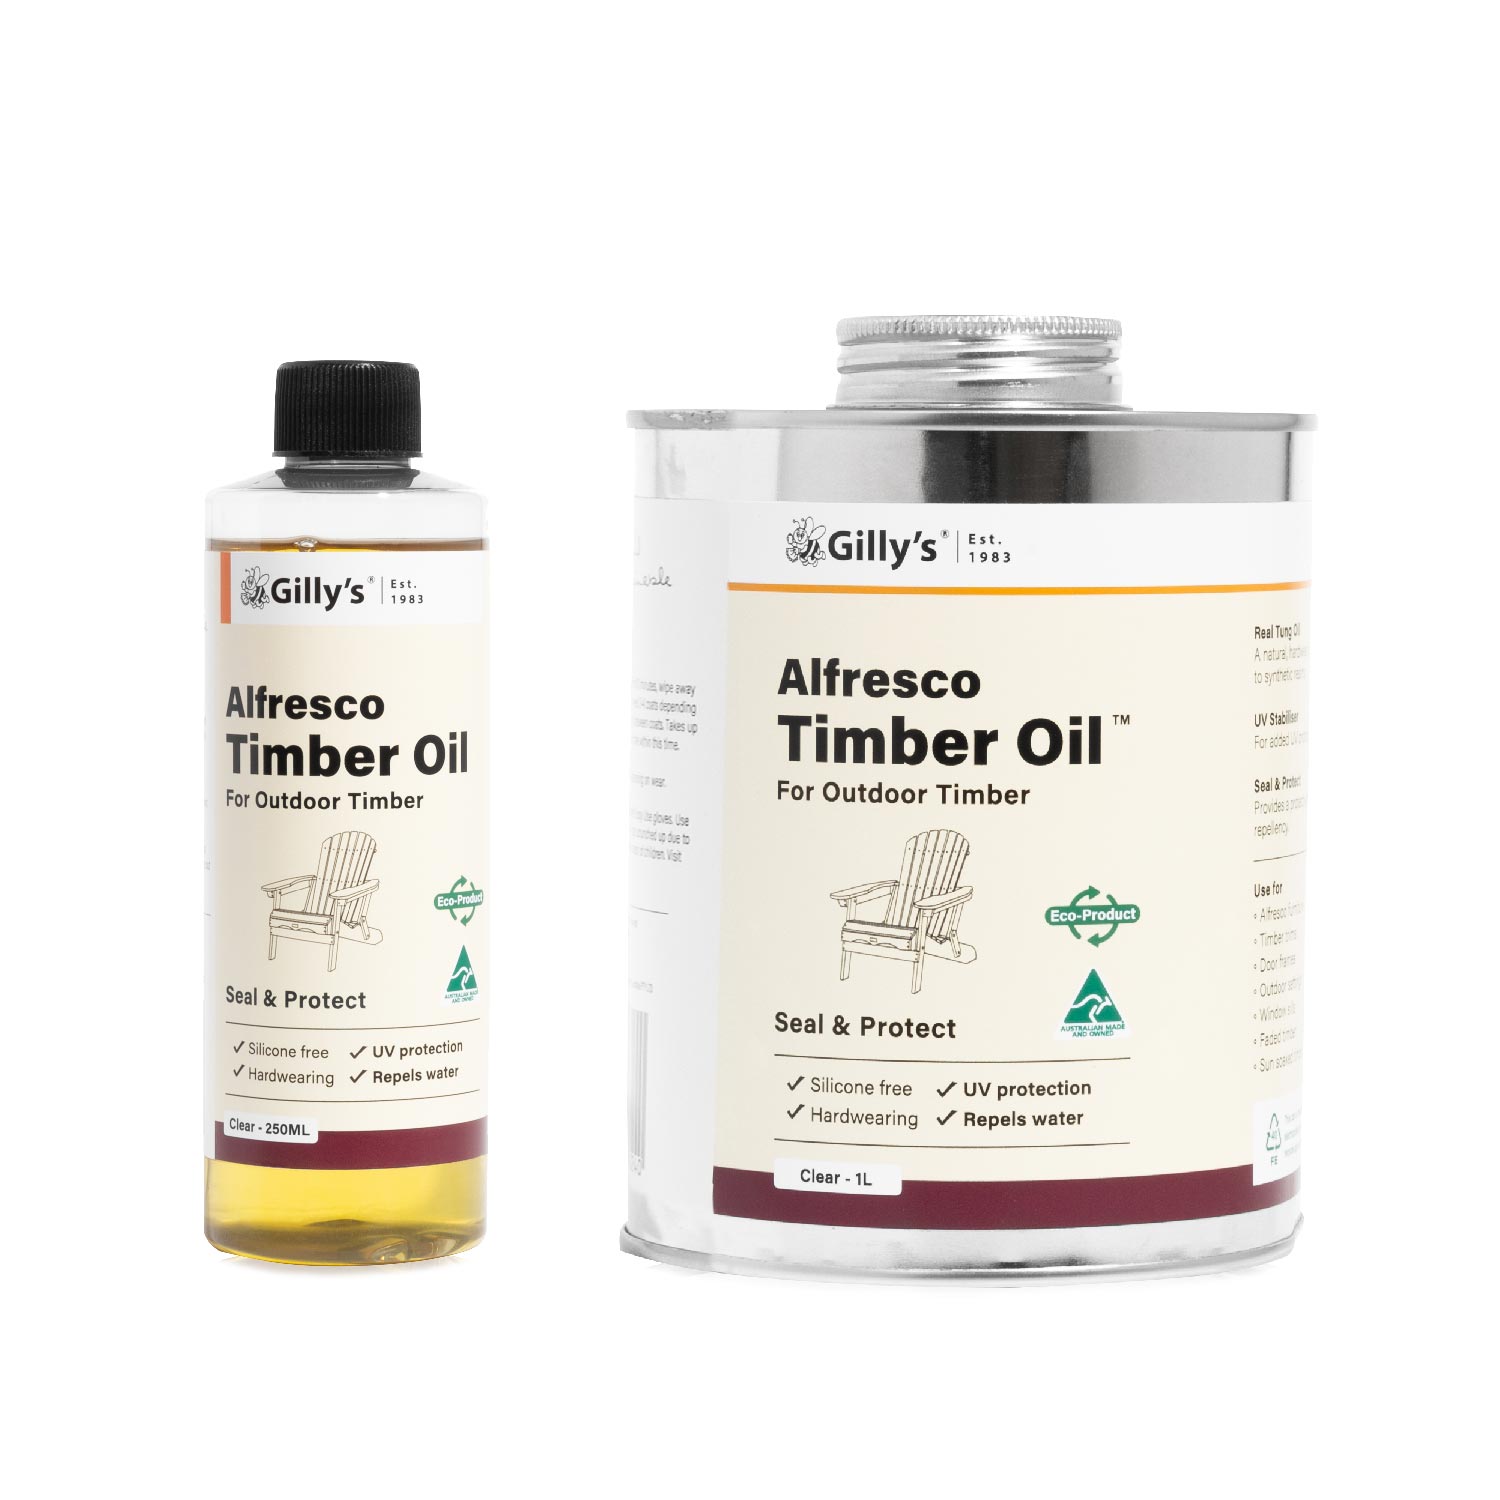 Alfresco Timber Oil by Gilly's